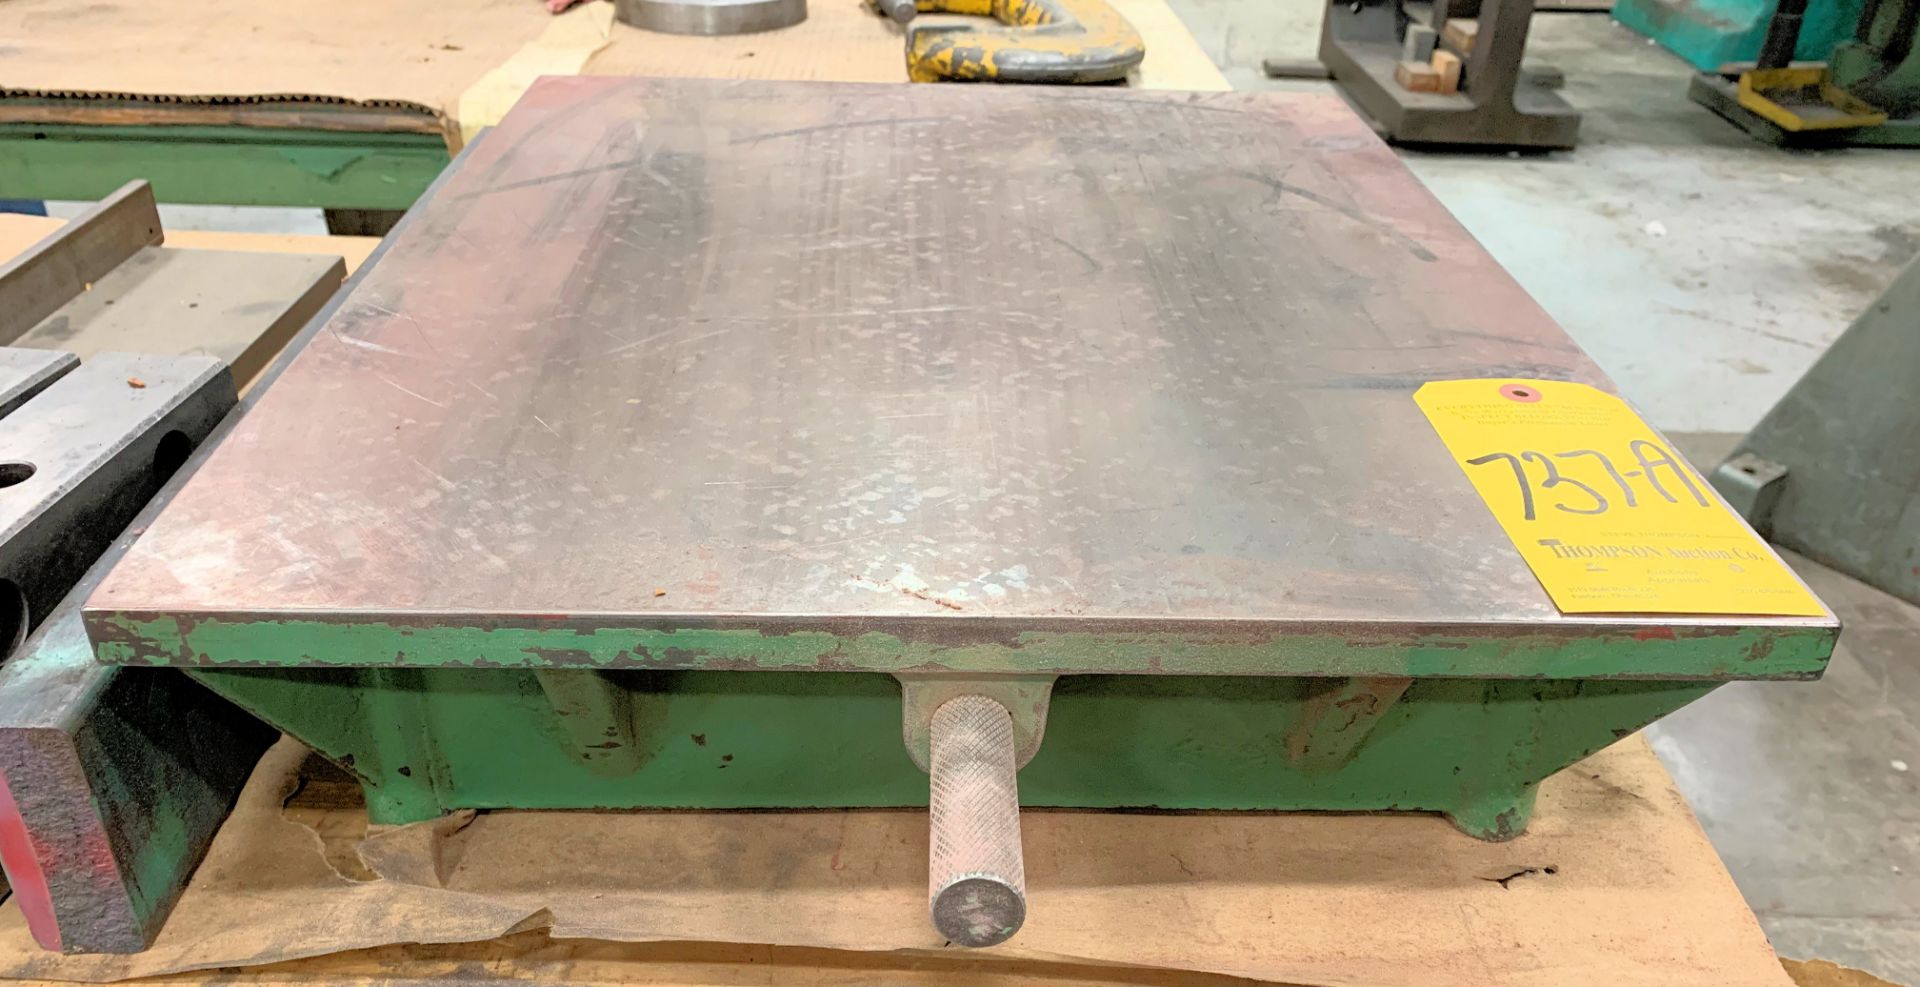 18" x 22" Cast Iron Surface Plate, (Contents Not Included)